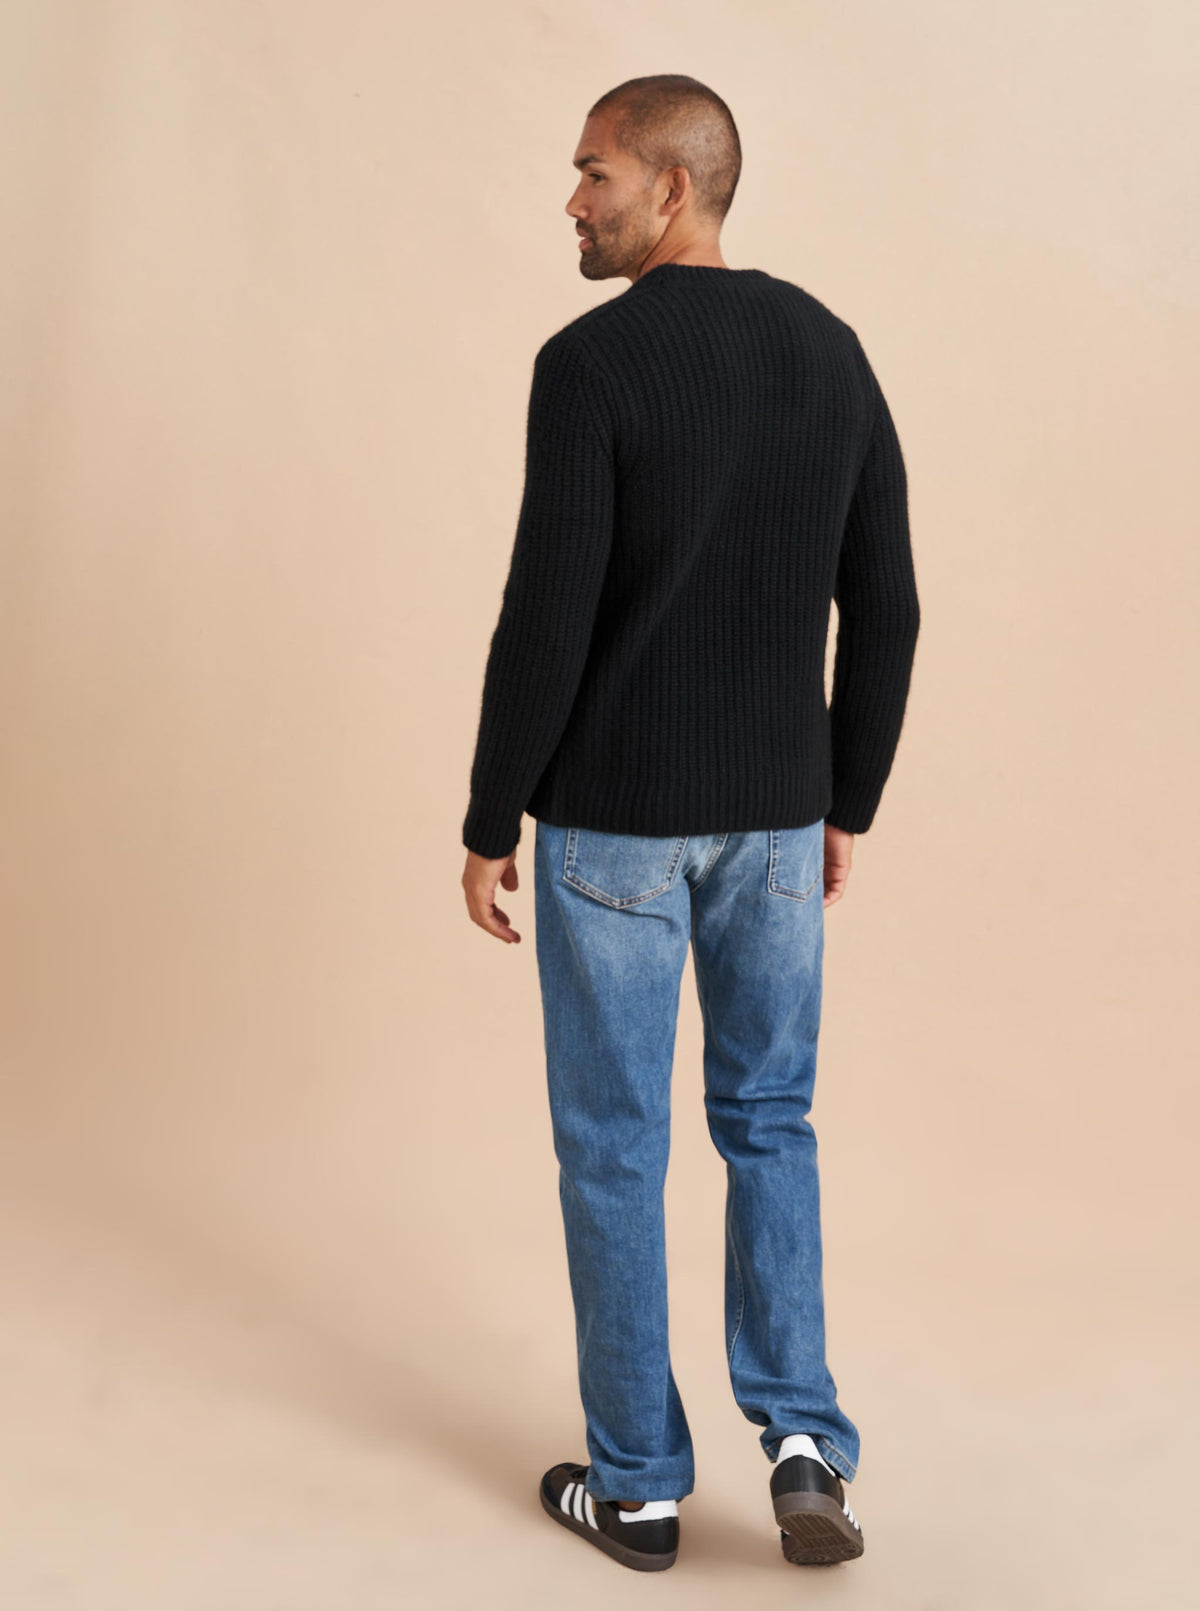 Our best-selling Toujours Sweater just got a lot better. Get your loved one on board with our men's version in our signature cozy cashmere. Give him the gift that keeps on giving. 